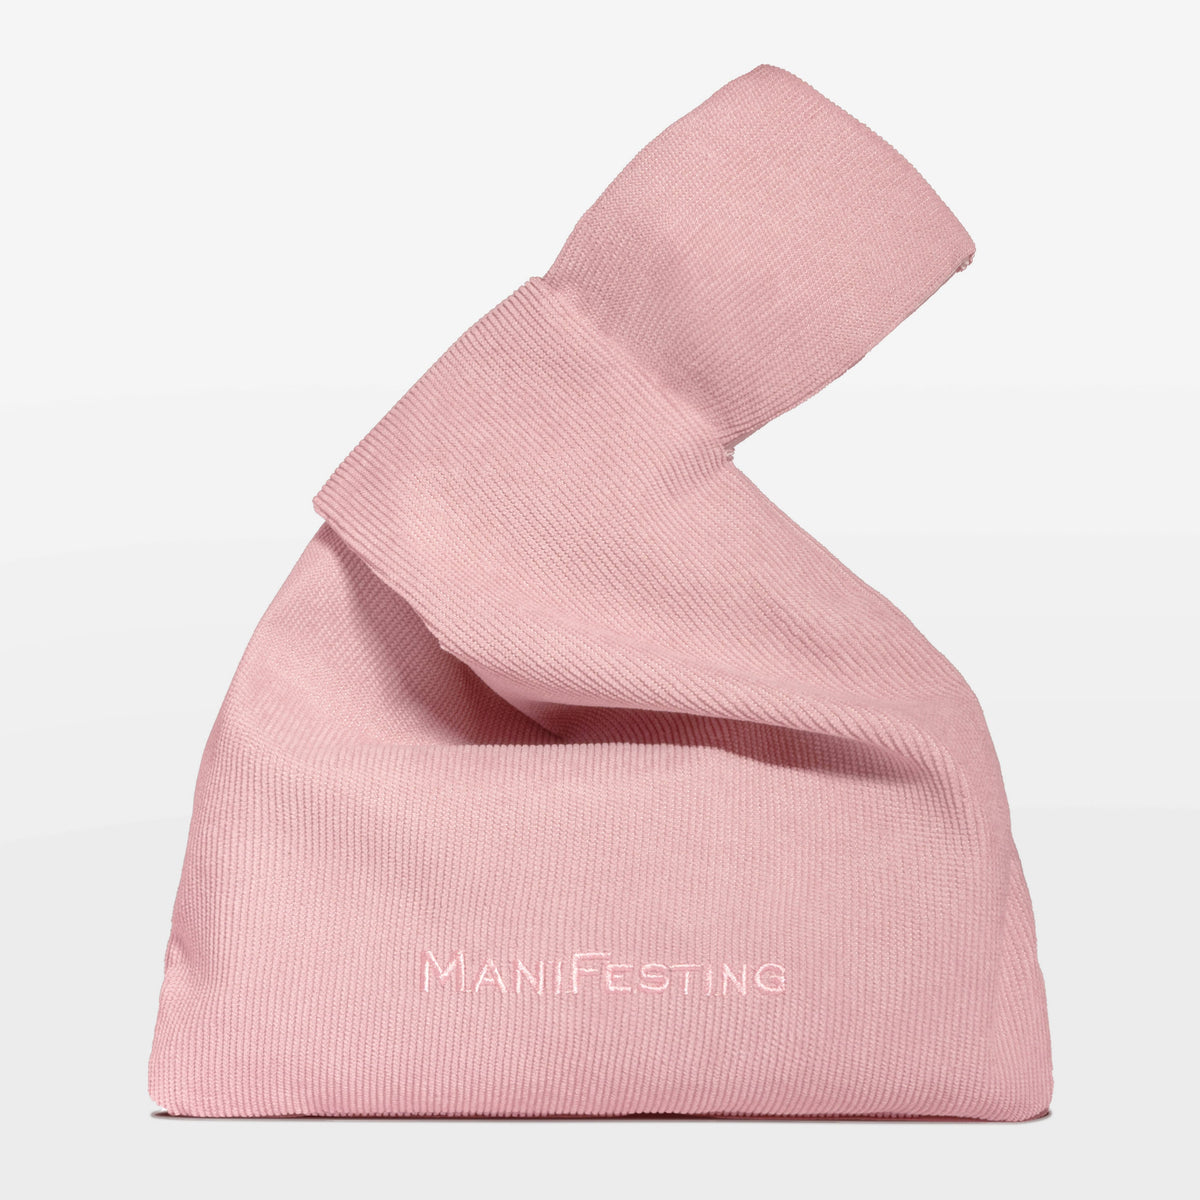 Gift The Mani Fest Knot Bag